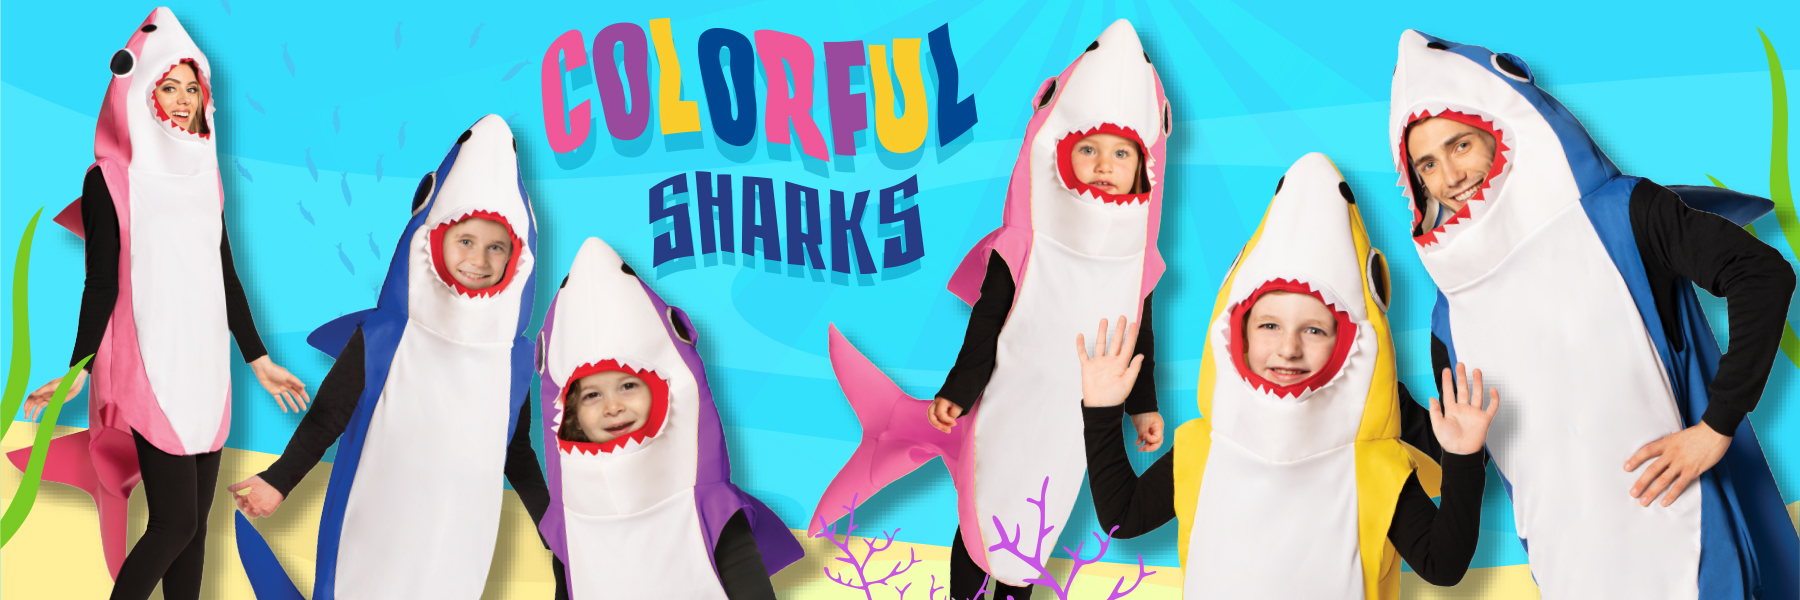 baby shark costumes, shark costumes for adults